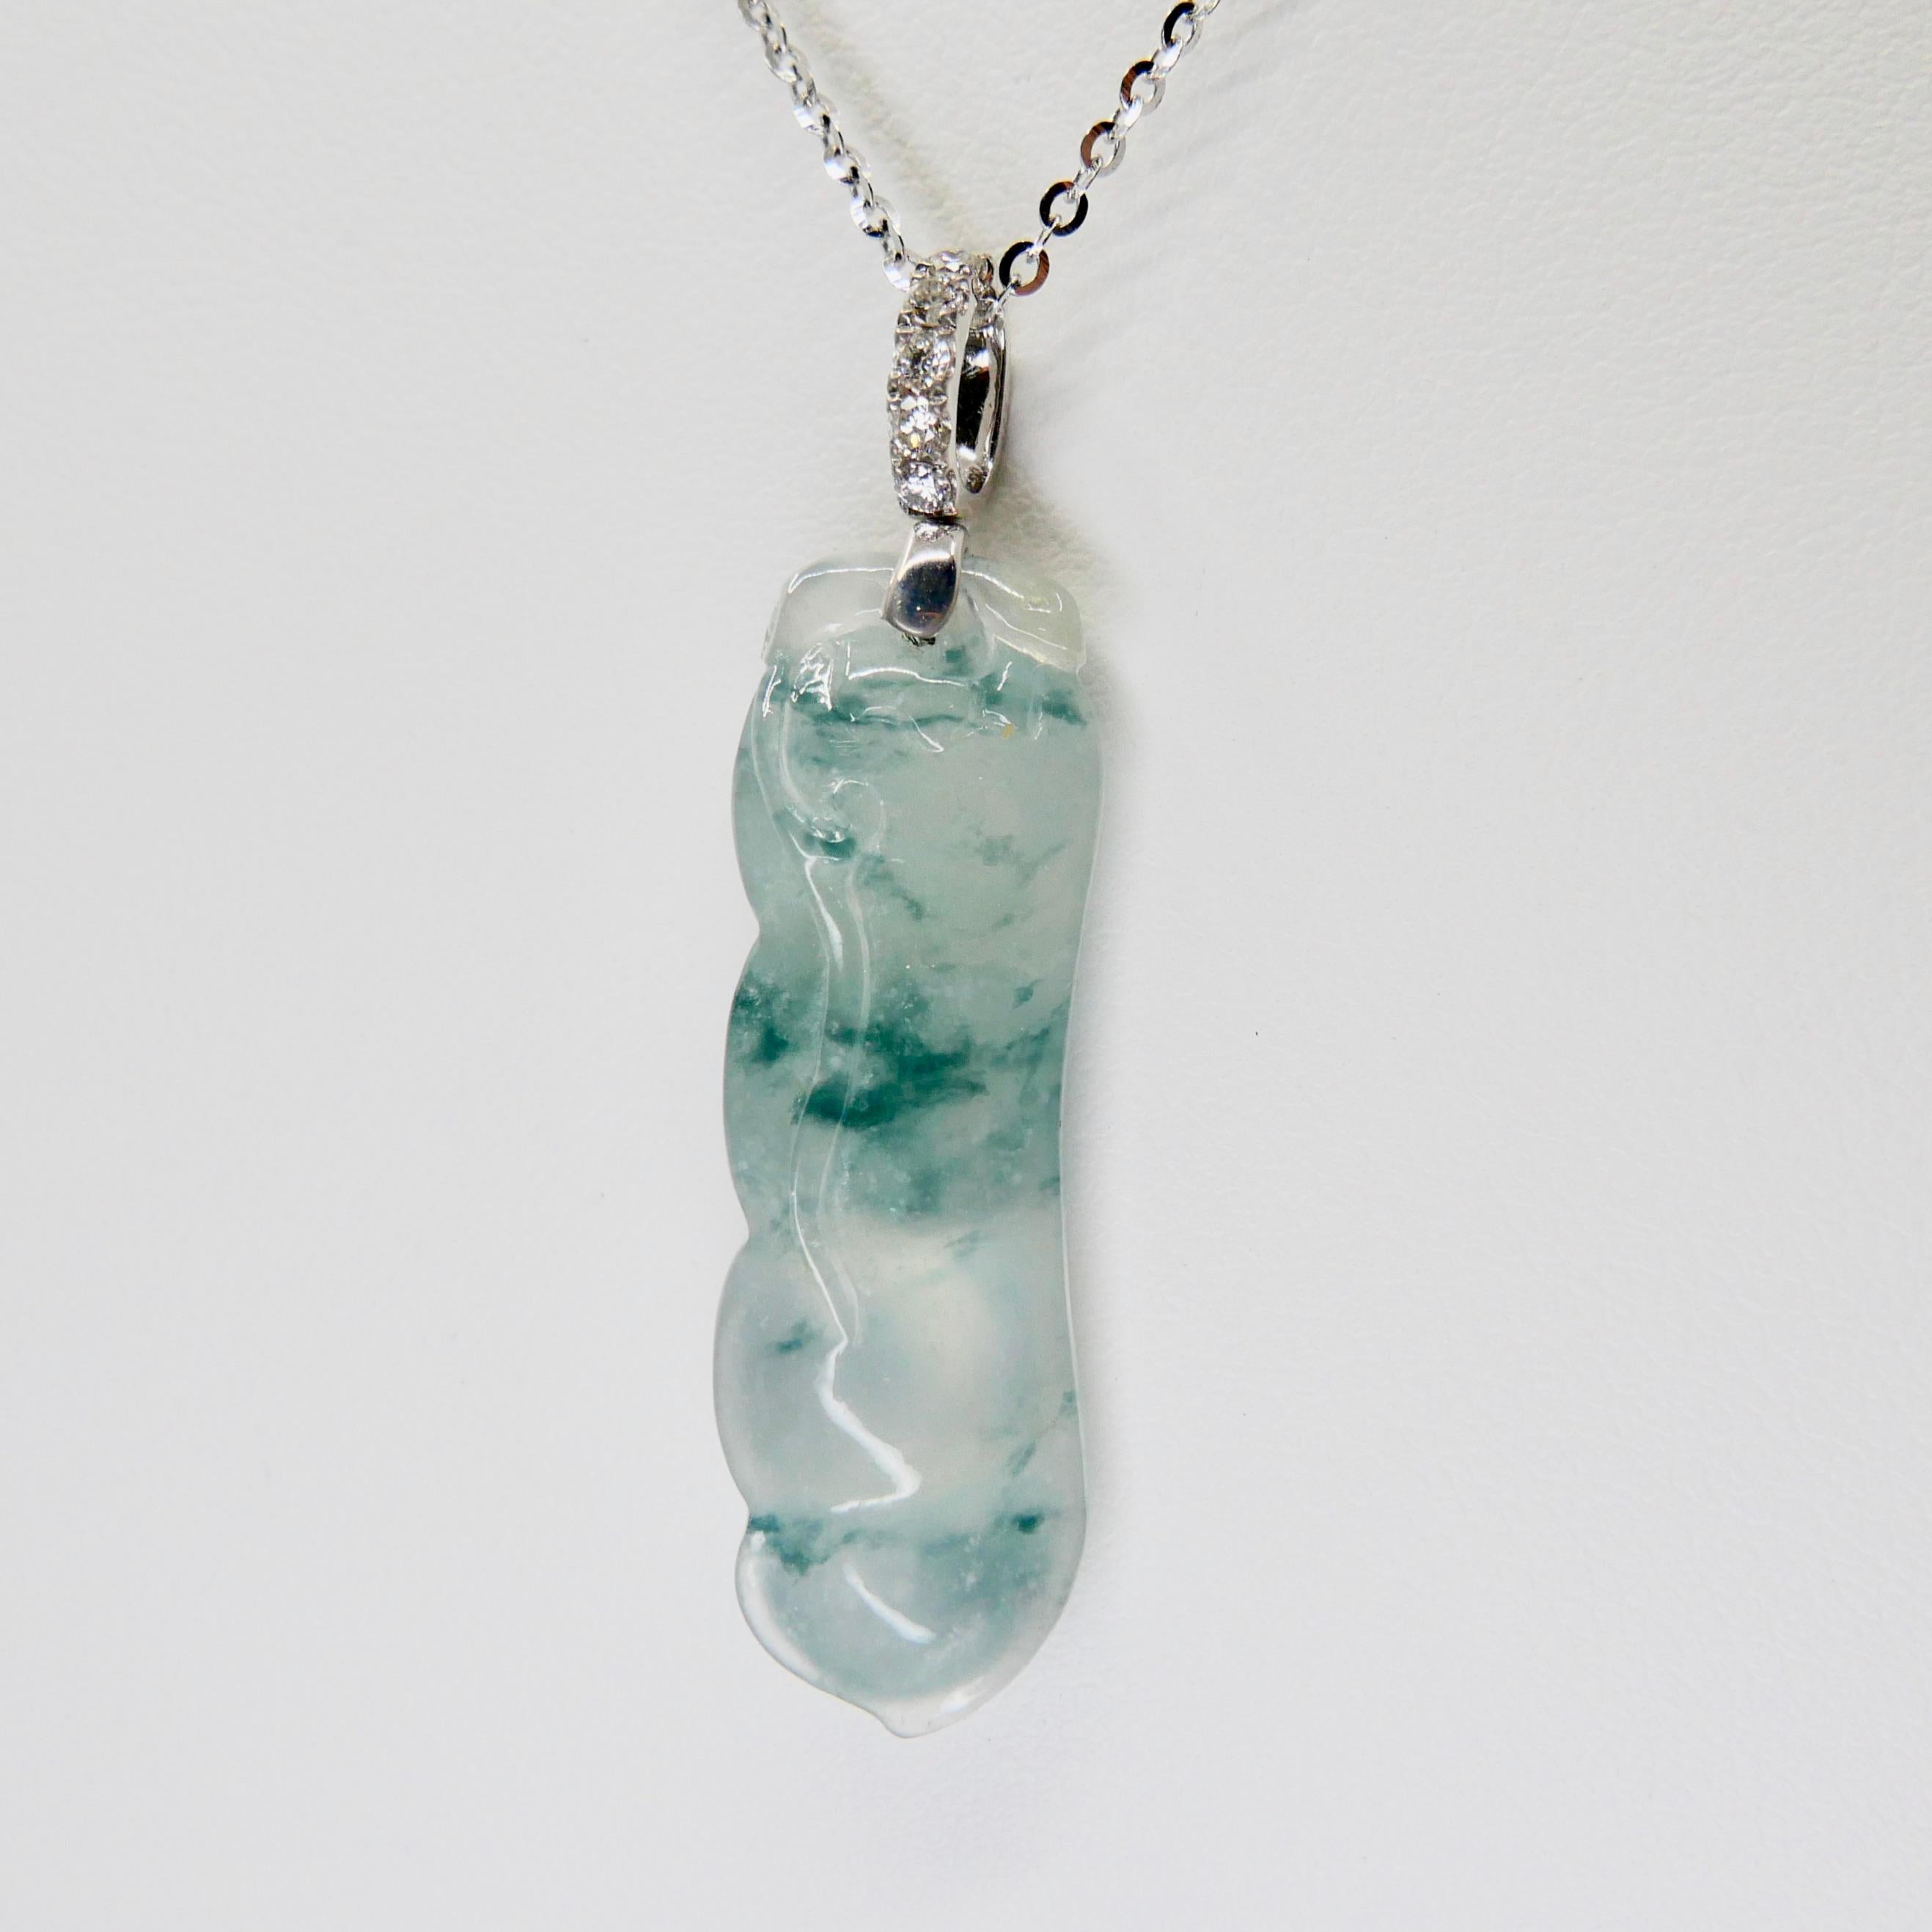 Certified Type A Icy Peapod Jade and Diamond Drop Necklace Pendant, Green Veins 5